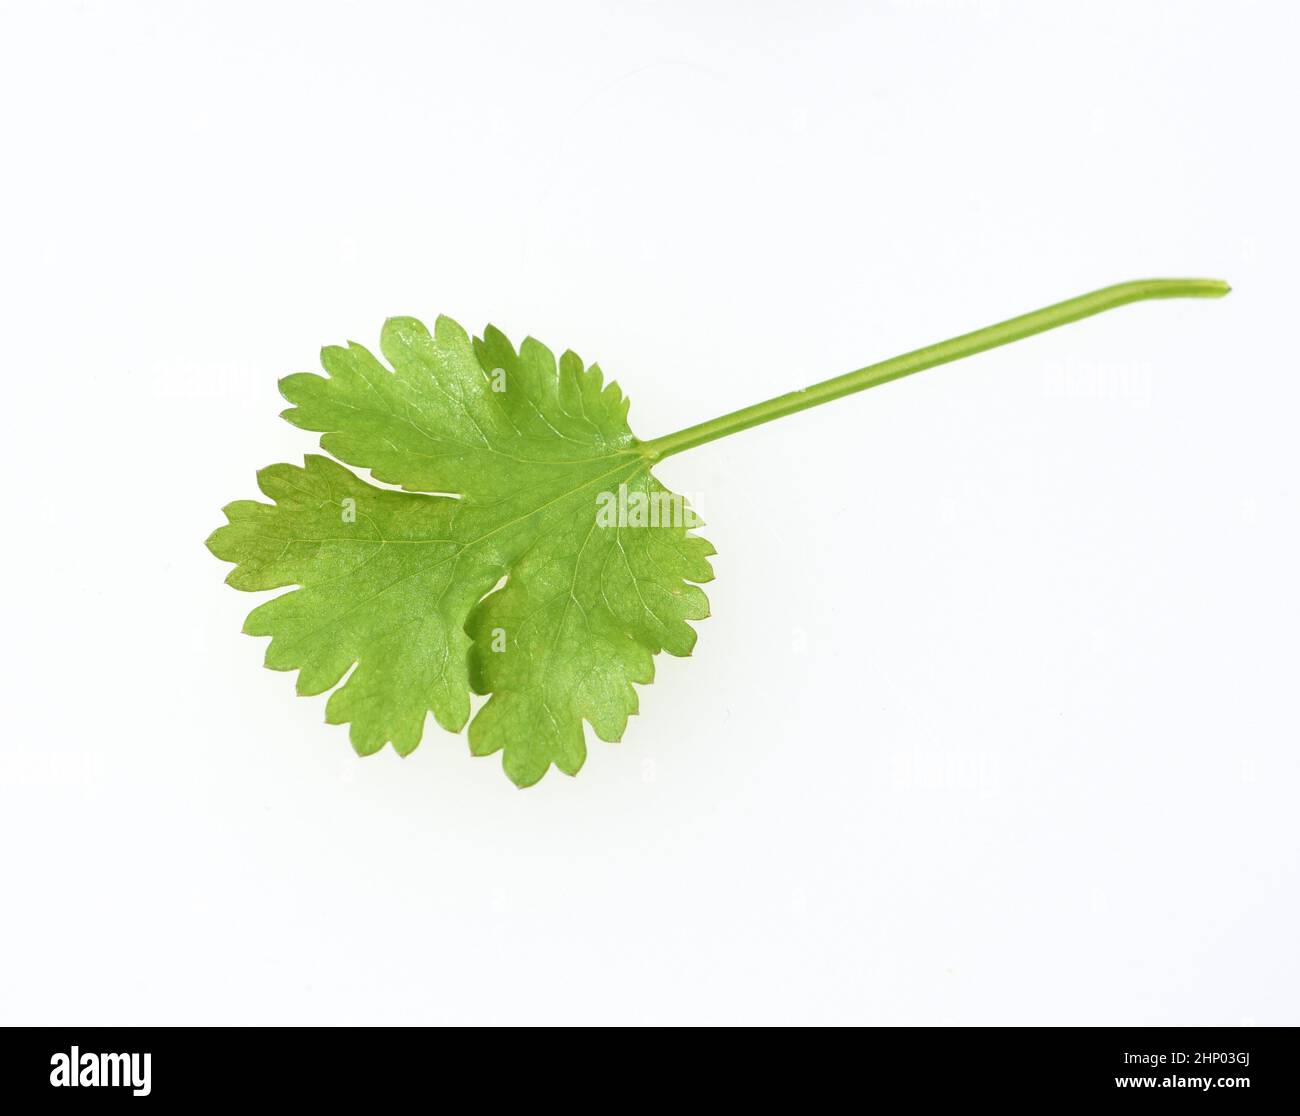 Coriander, Coriandrum sativum, is an important medicinal and herb plant. Stock Photo